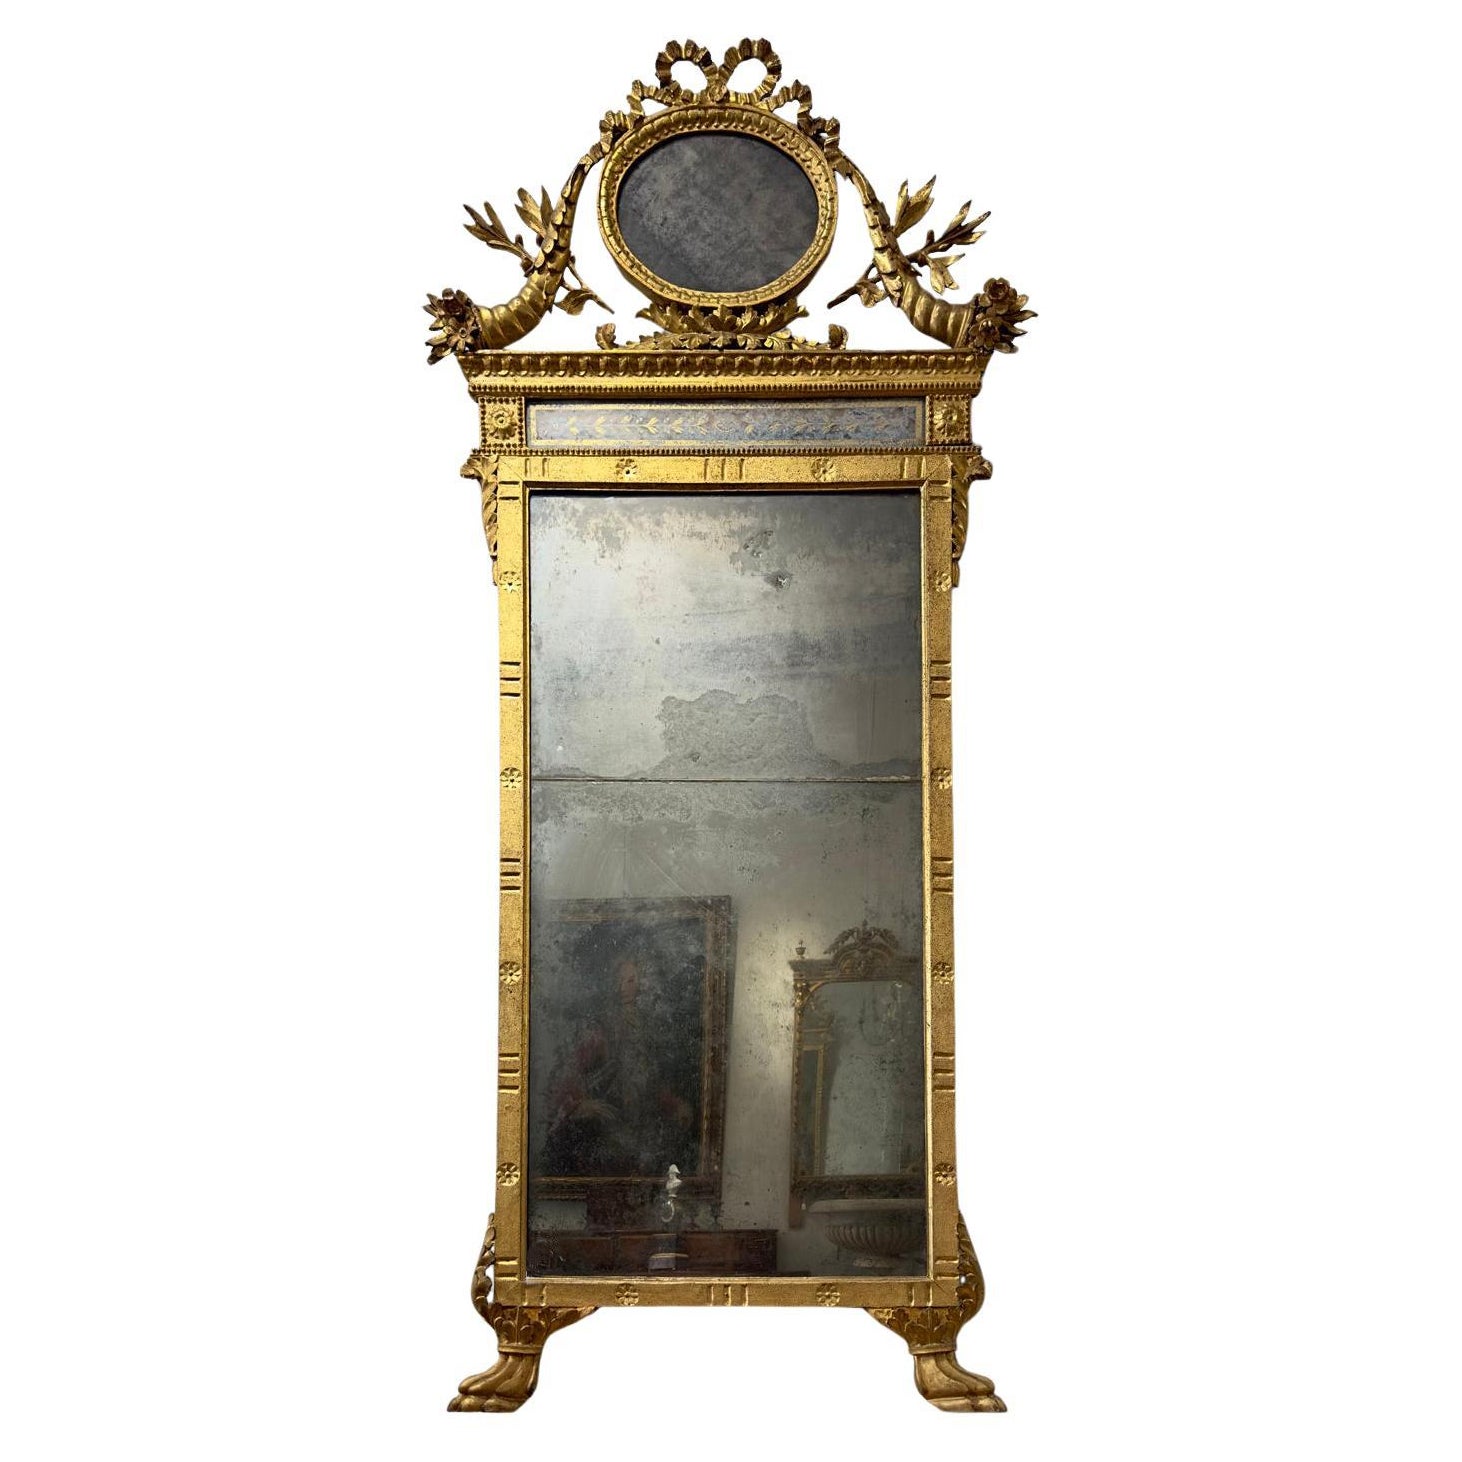 END OF THE 18th CENTURY NEOCLASSICAL MIRROR WITH CORNUCOPIAS AND OLIVE BRANCHES 